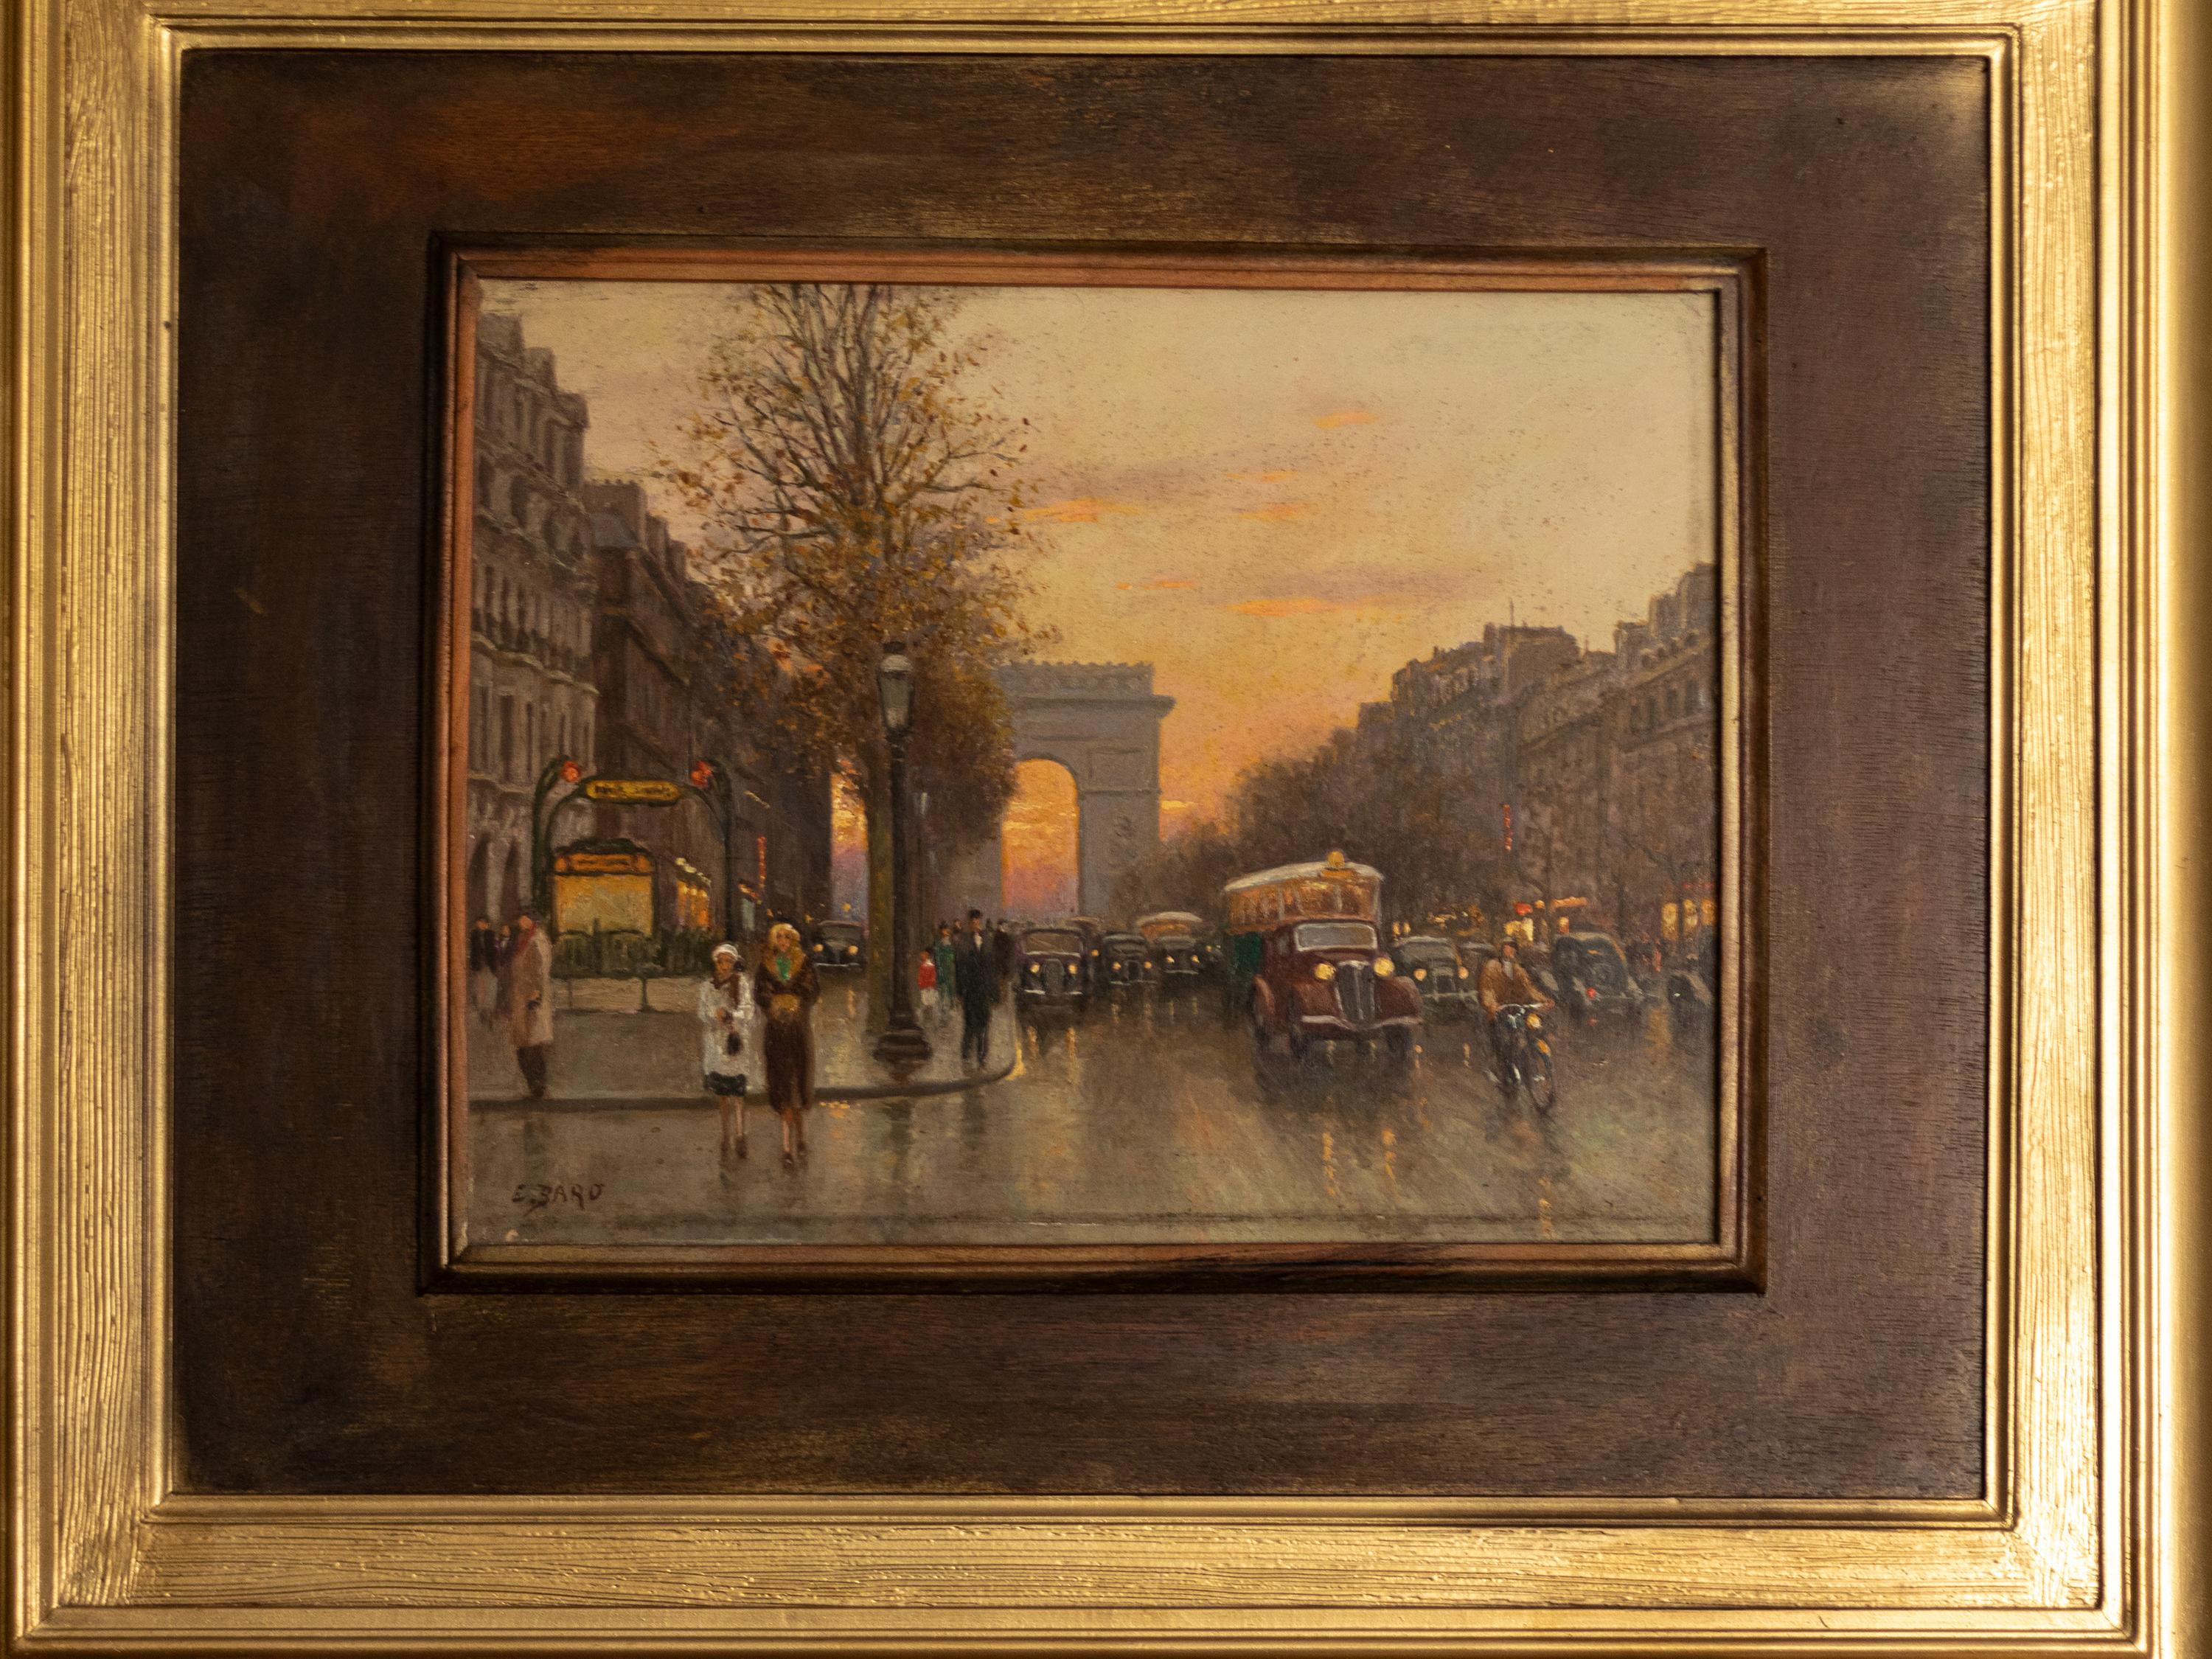 An exquisite 1930s oil painting signed 